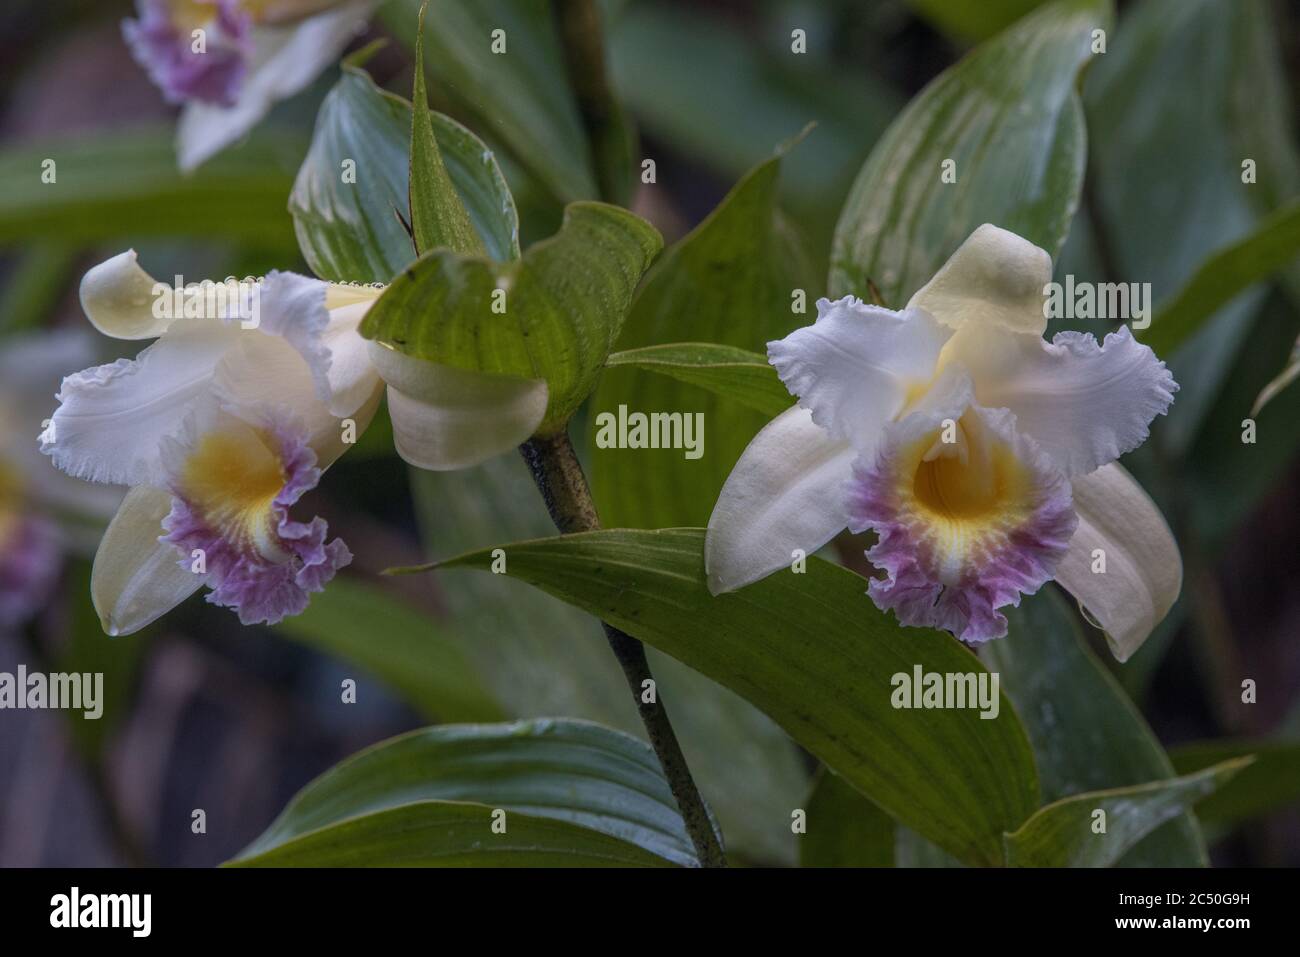 Sobralia ecuadorana, an Ecuadorian endemic species of orchid grows in the cool cloudforests of the Western Andes. Stock Photo